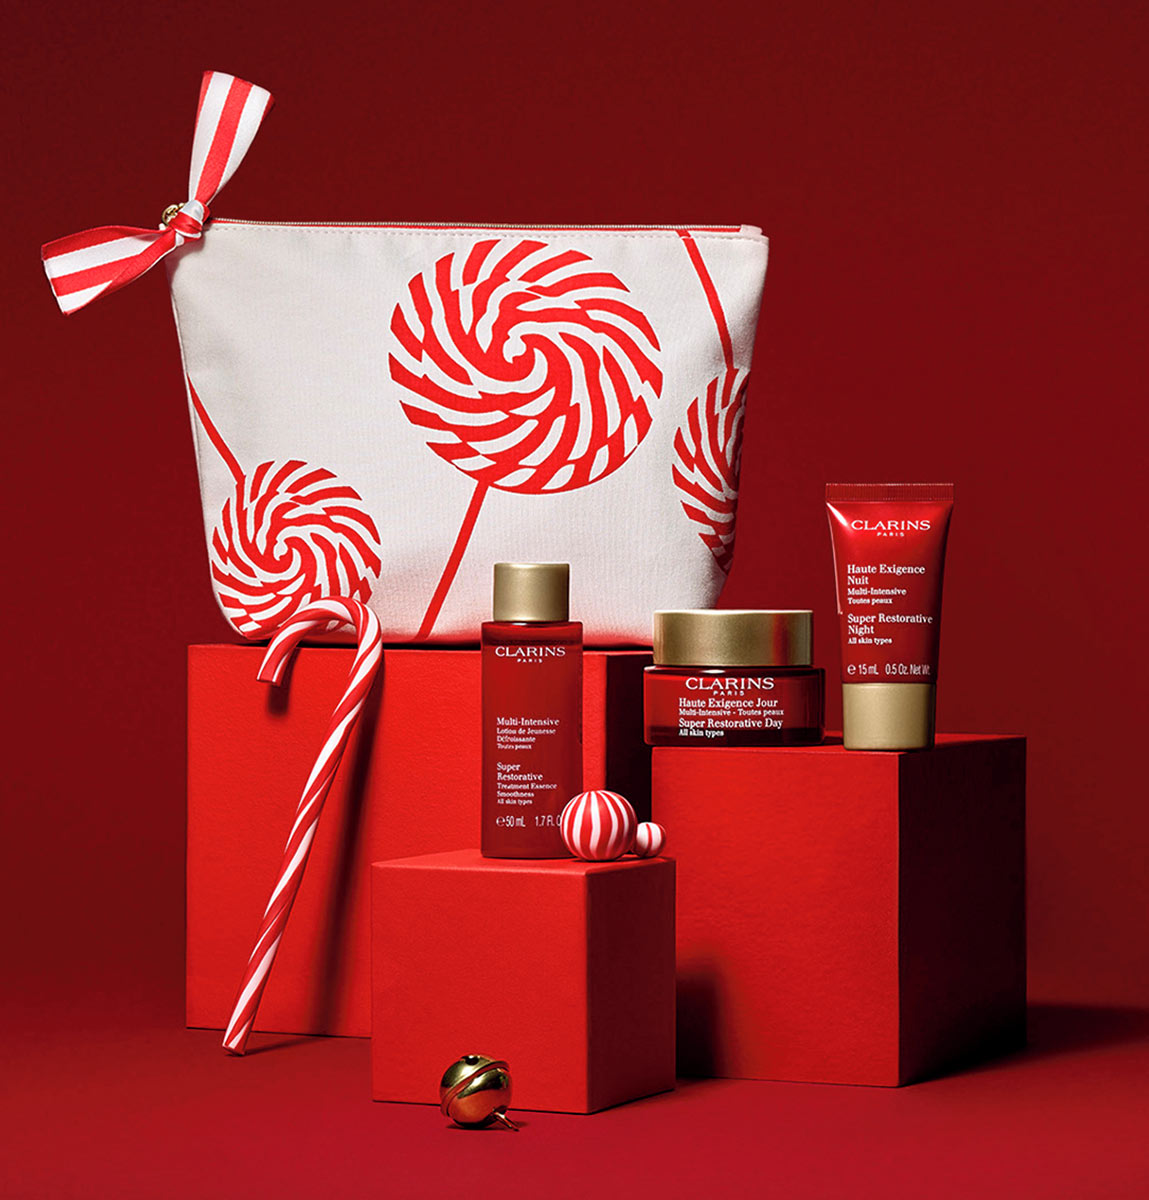 December 12 – Clarins Client Day at Articoli by Bosco